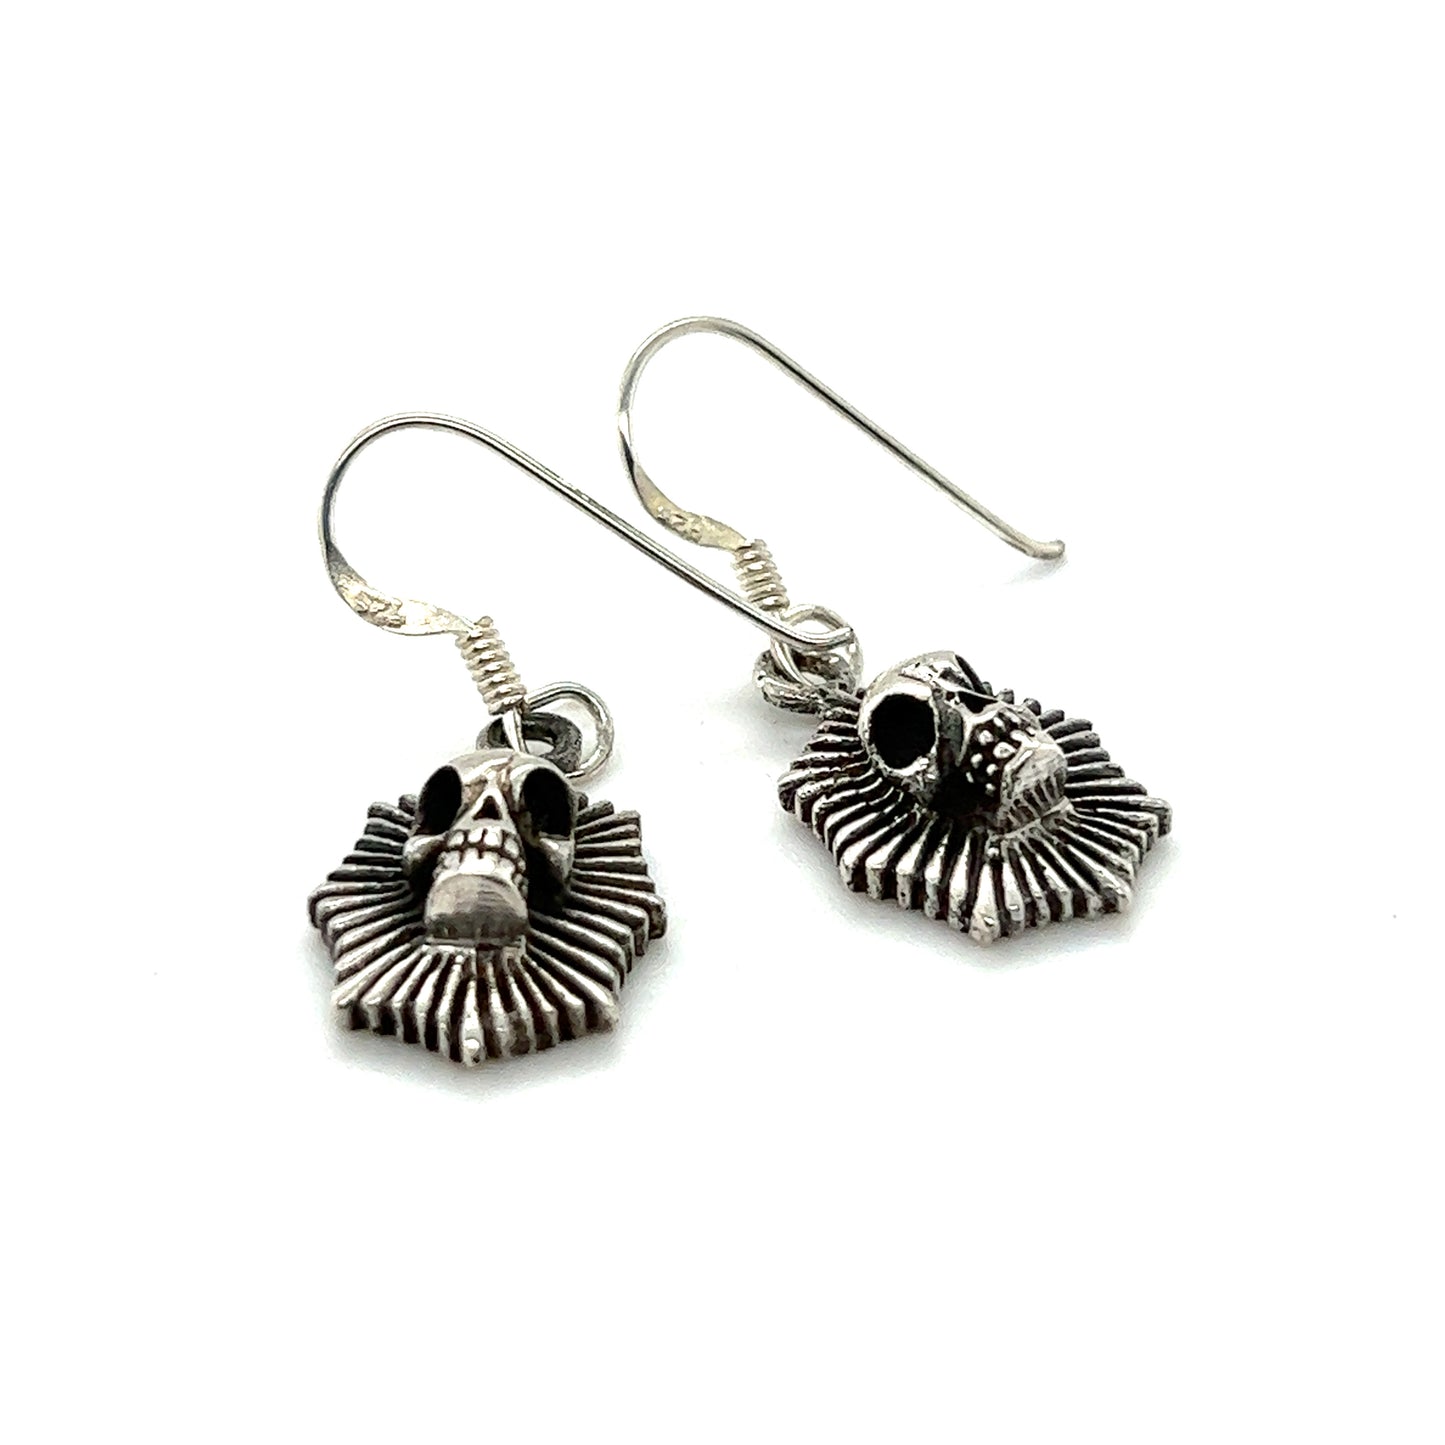 A pair of Radiant Skull earrings by Super Silver, exuding a sense of mystique.